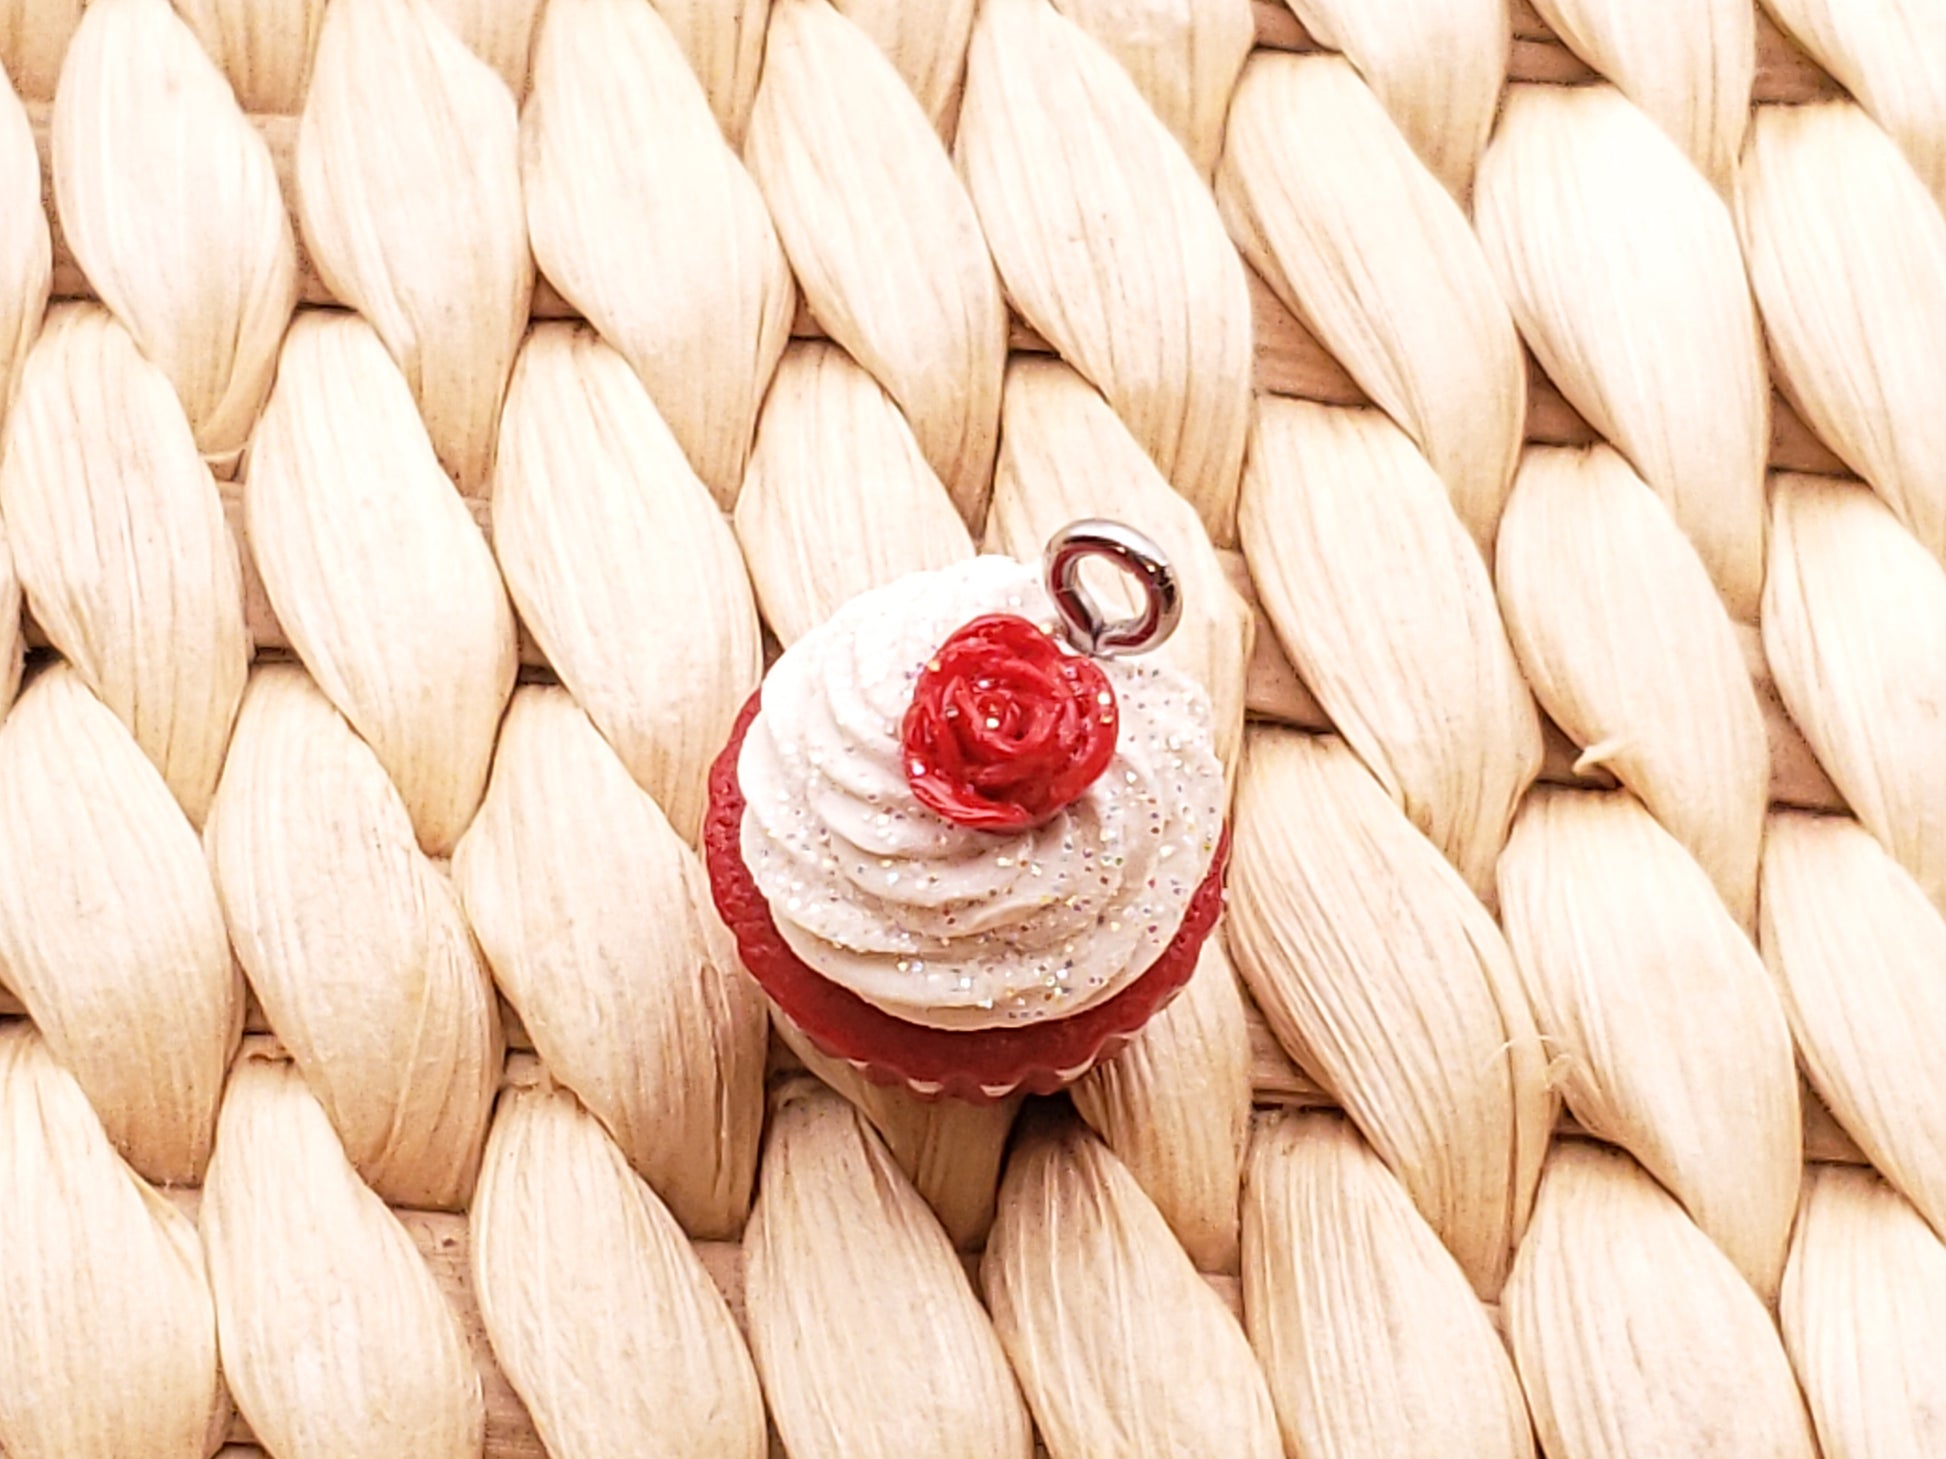 a cupcake with white frosting and a red rose on top